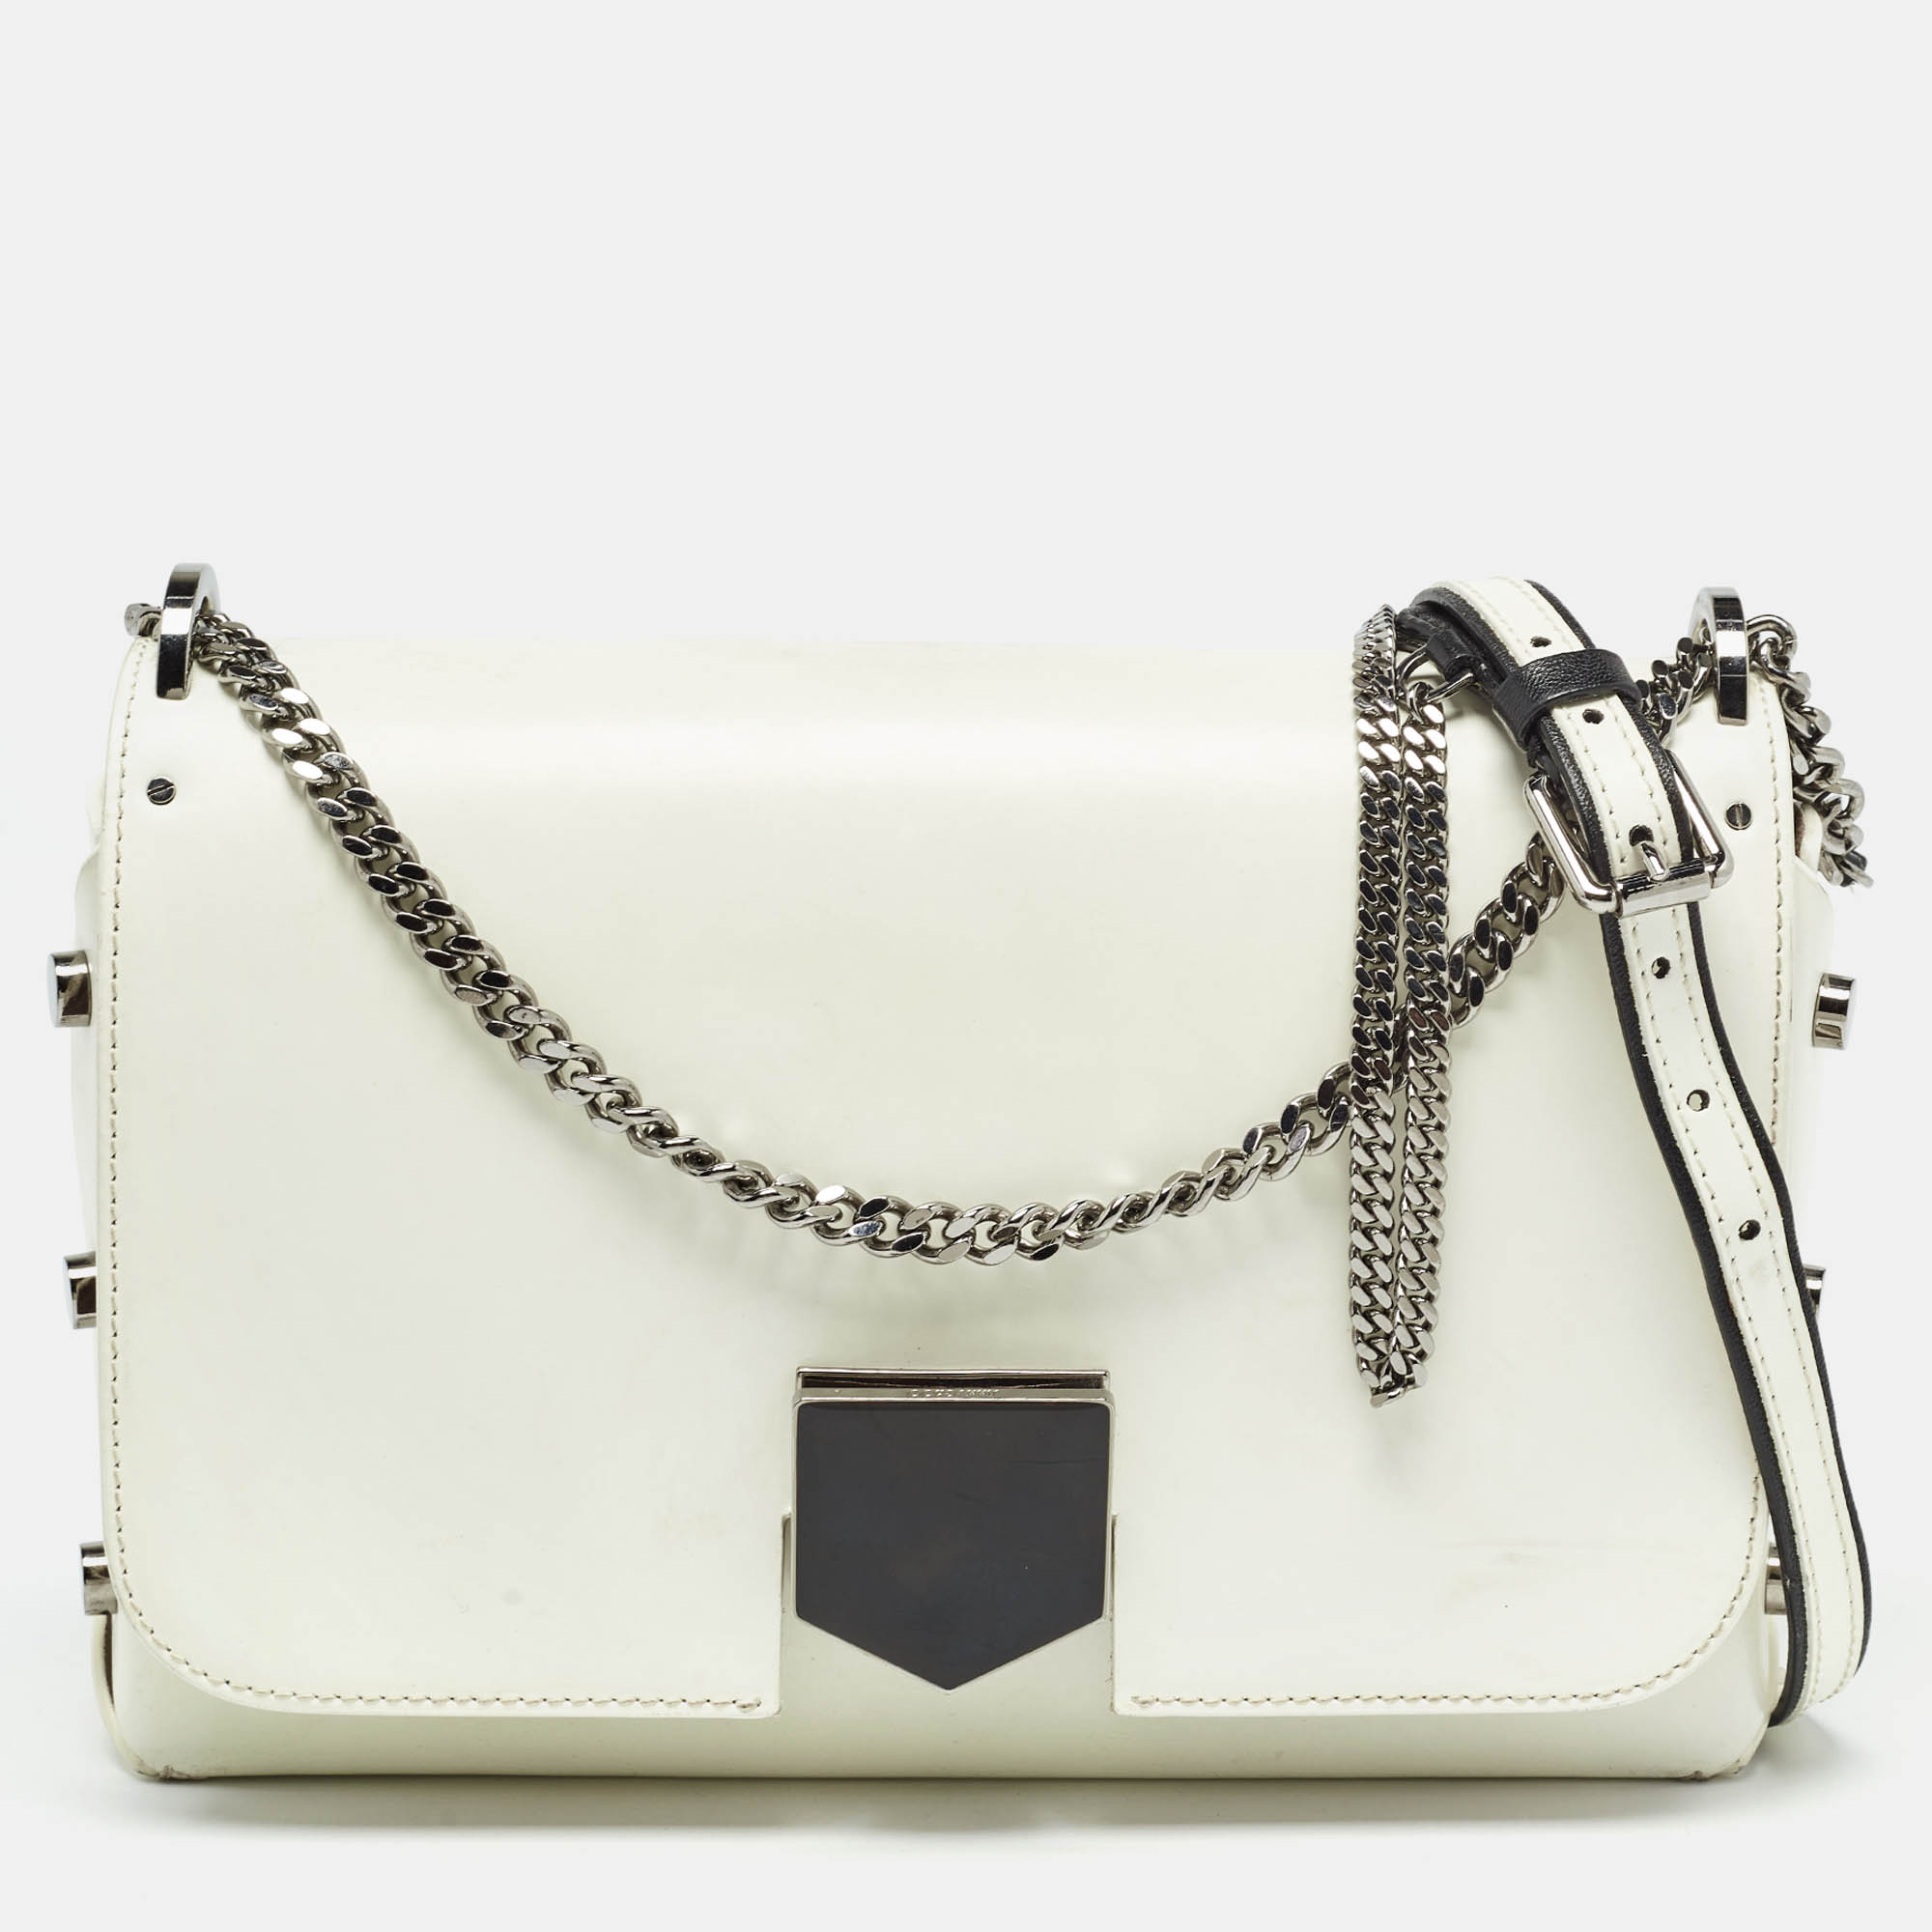 Thoughtful details high quality and everyday convenience mark this shoulder bag for women by Jimmy Choo. The bag is sewn with skill to deliver a refined look and an impeccable finish.